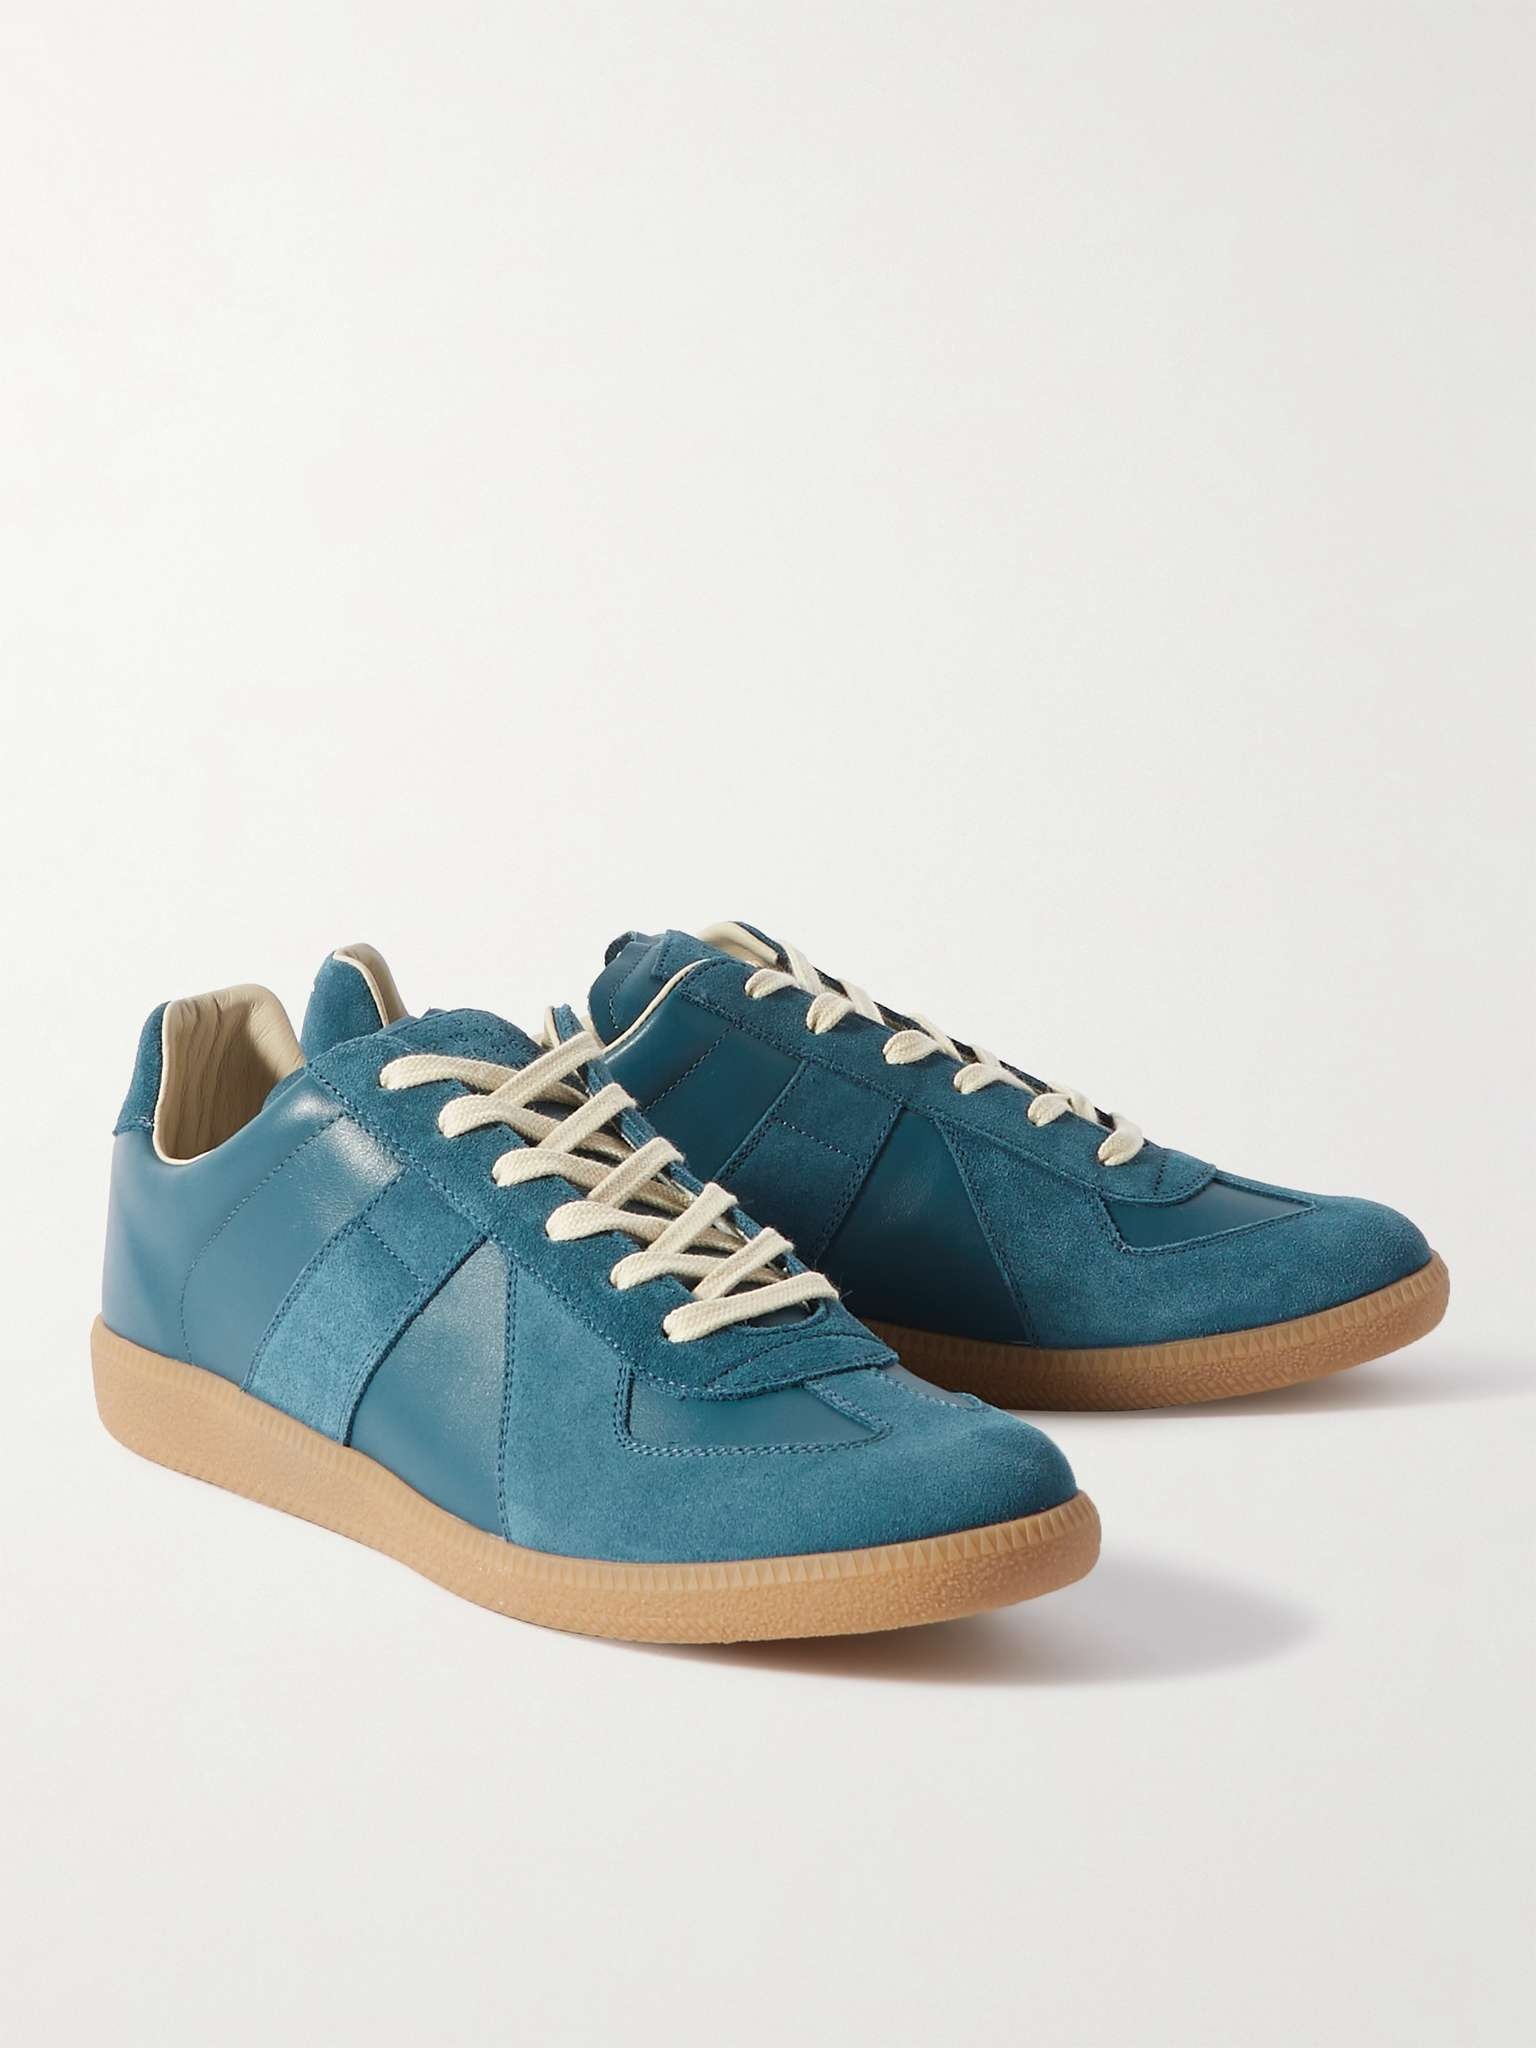 Replica Leather and Suede Sneakers - 4